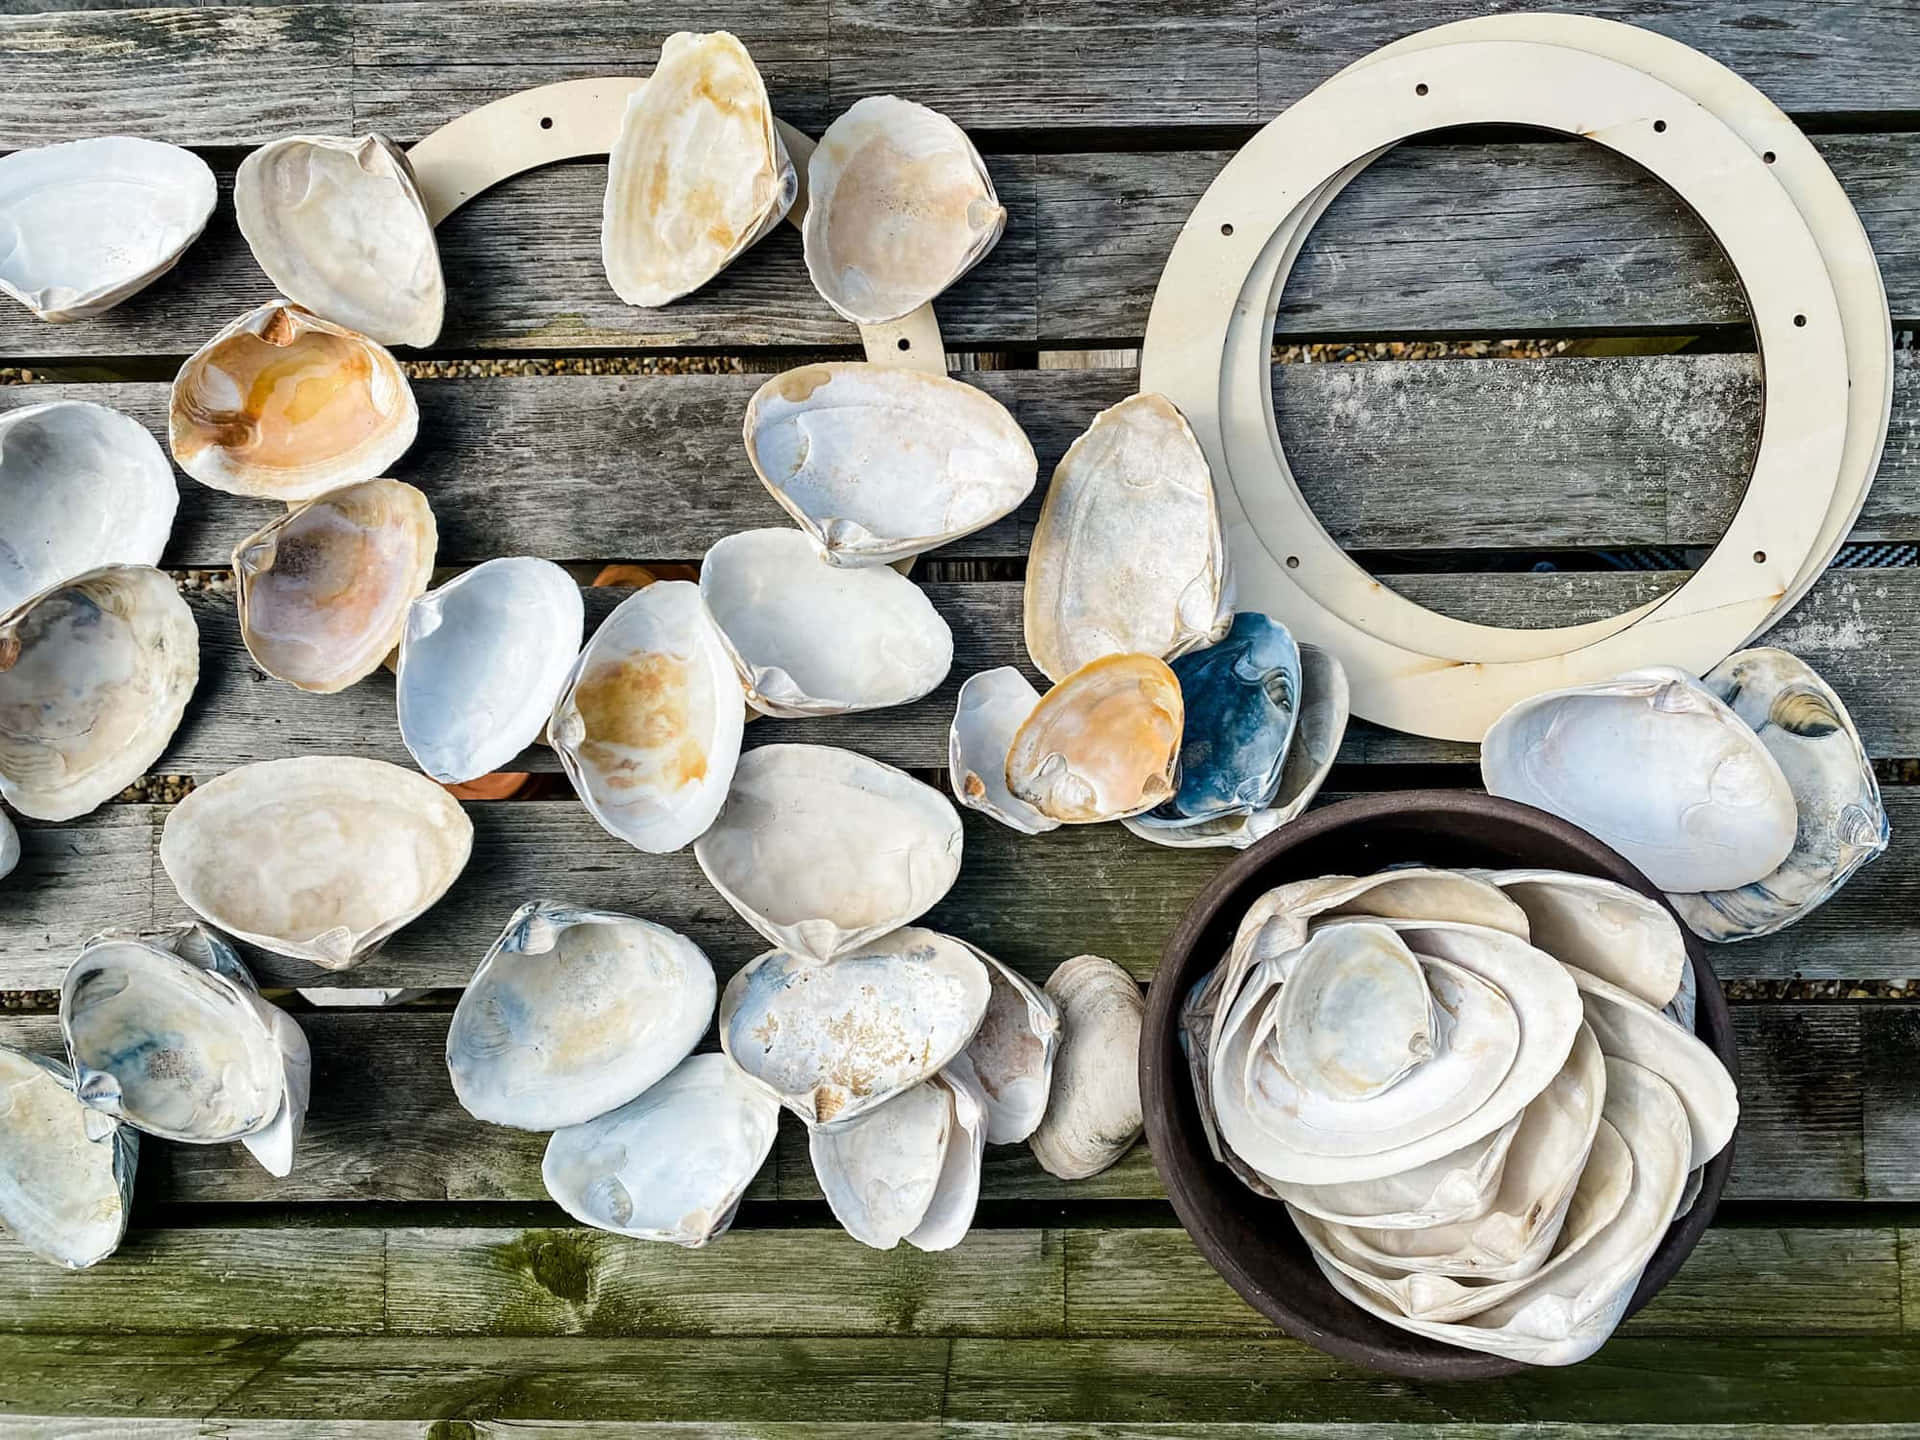 Uncover unexpected treasures with a Clam Shell Wallpaper